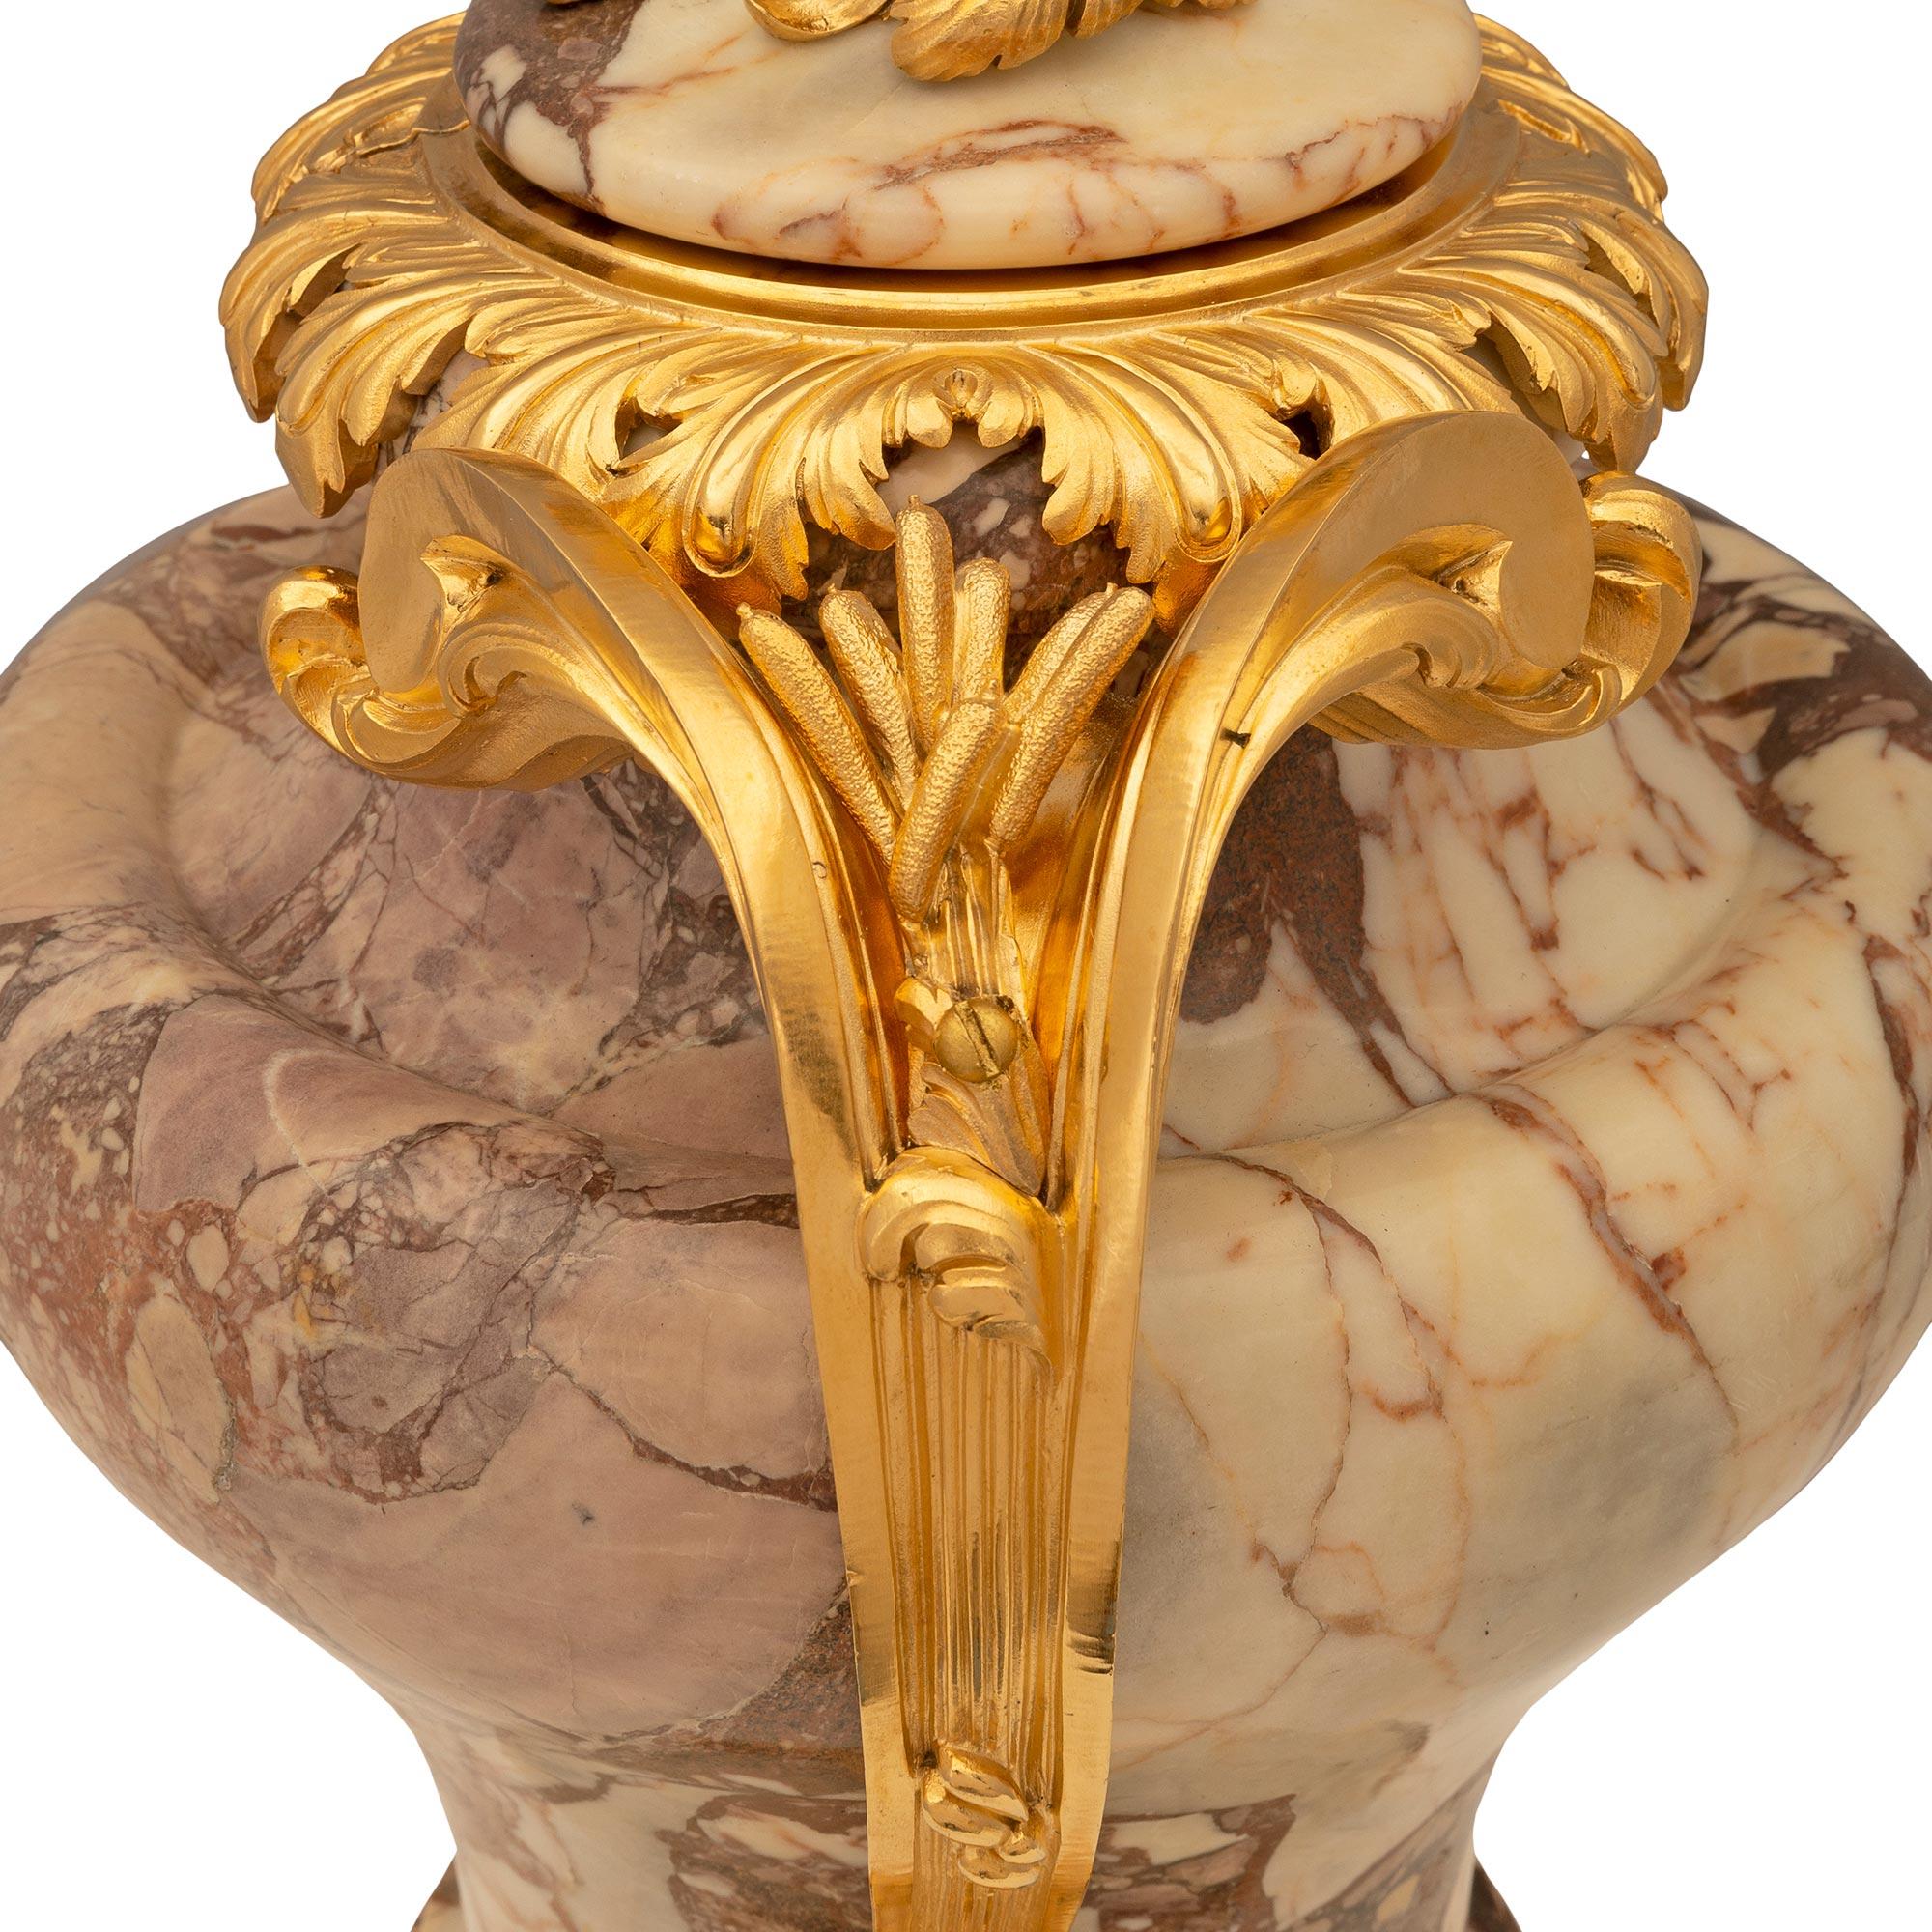 French 19th Century Louis XV St. Brèche Violette Marble and Ormolu Urn For Sale 2